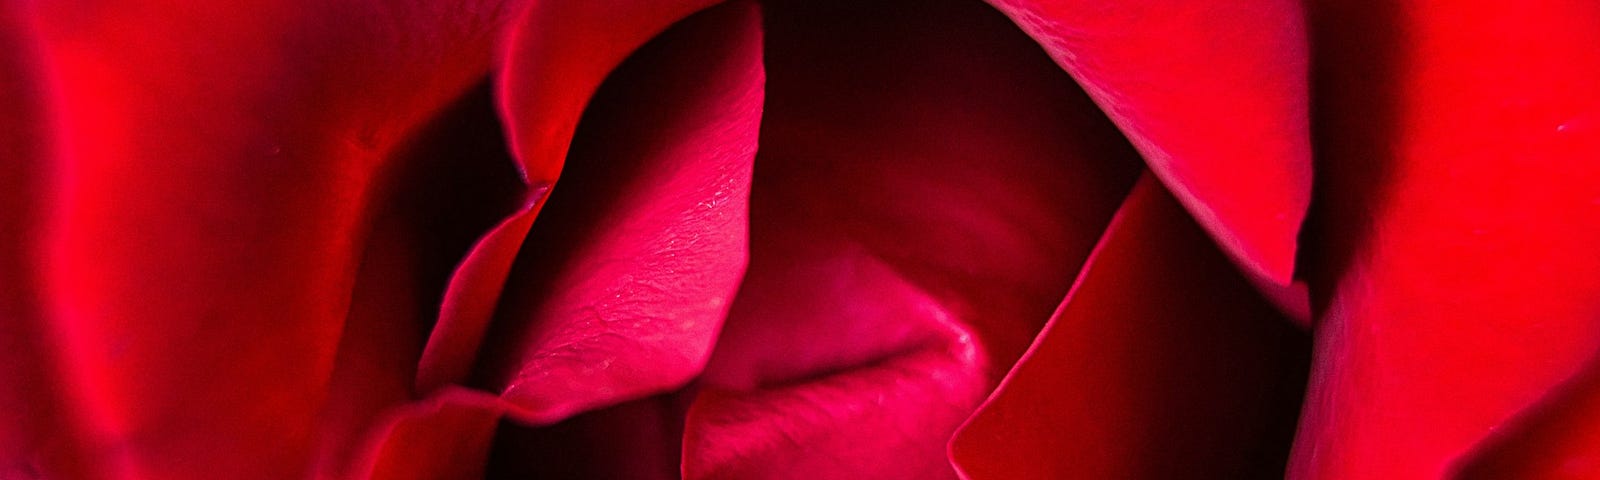 A close up of the heart of a deep red rose